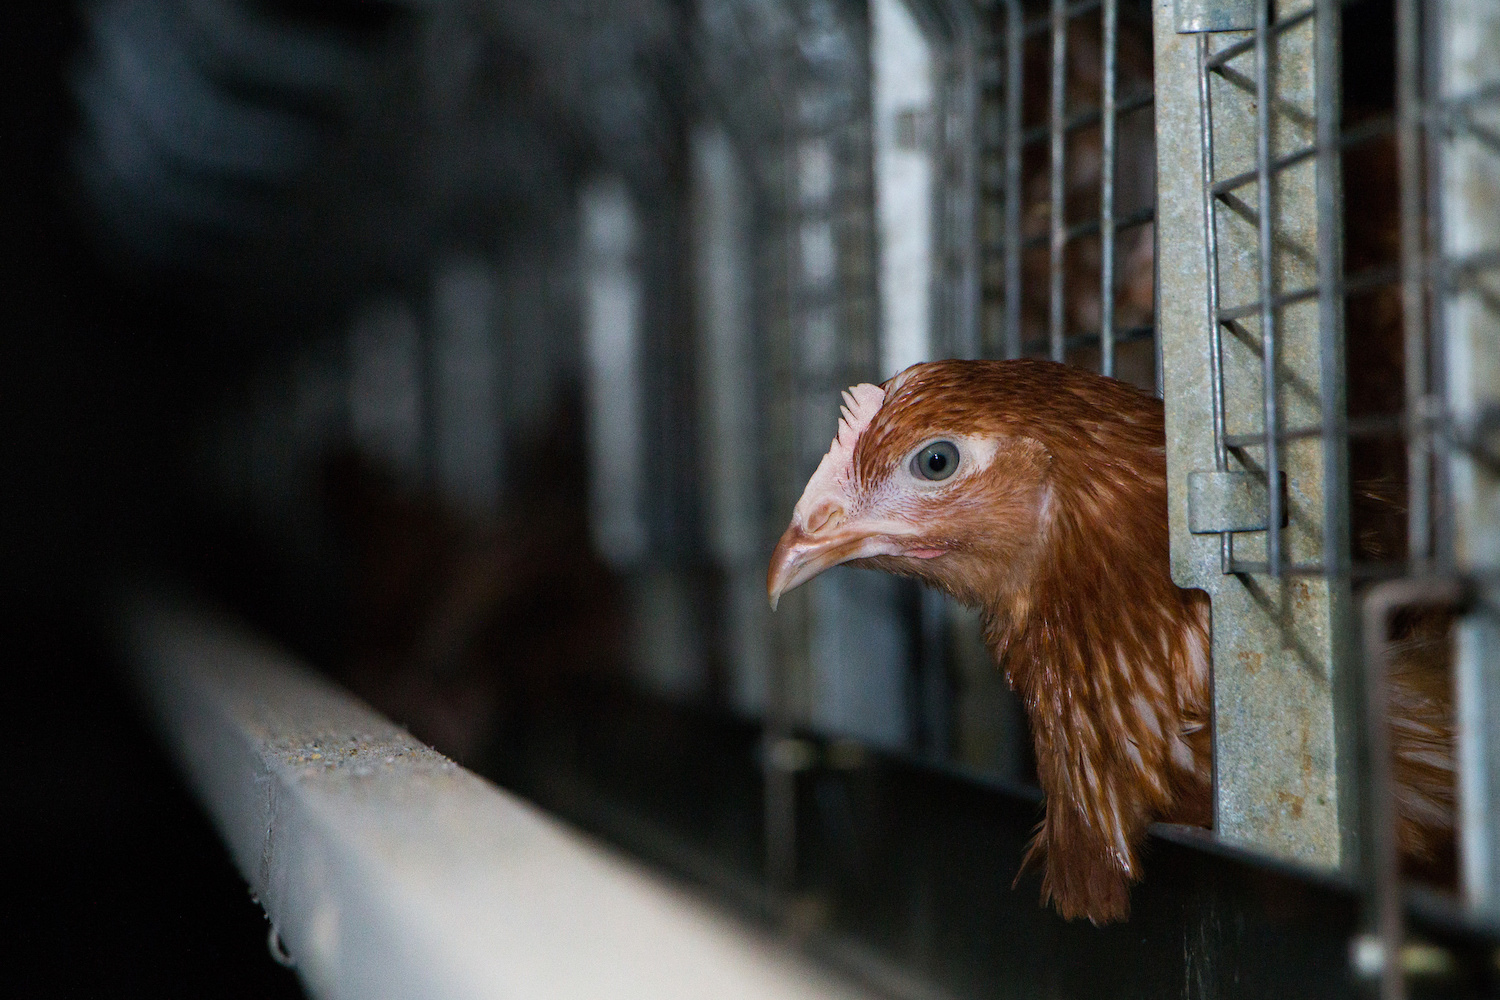 Will Perdue’s plan for “more humane” chicken slaughter ultimately hurt producers? Credit: Flickr / Dzīvnieku brīvība, February 2019